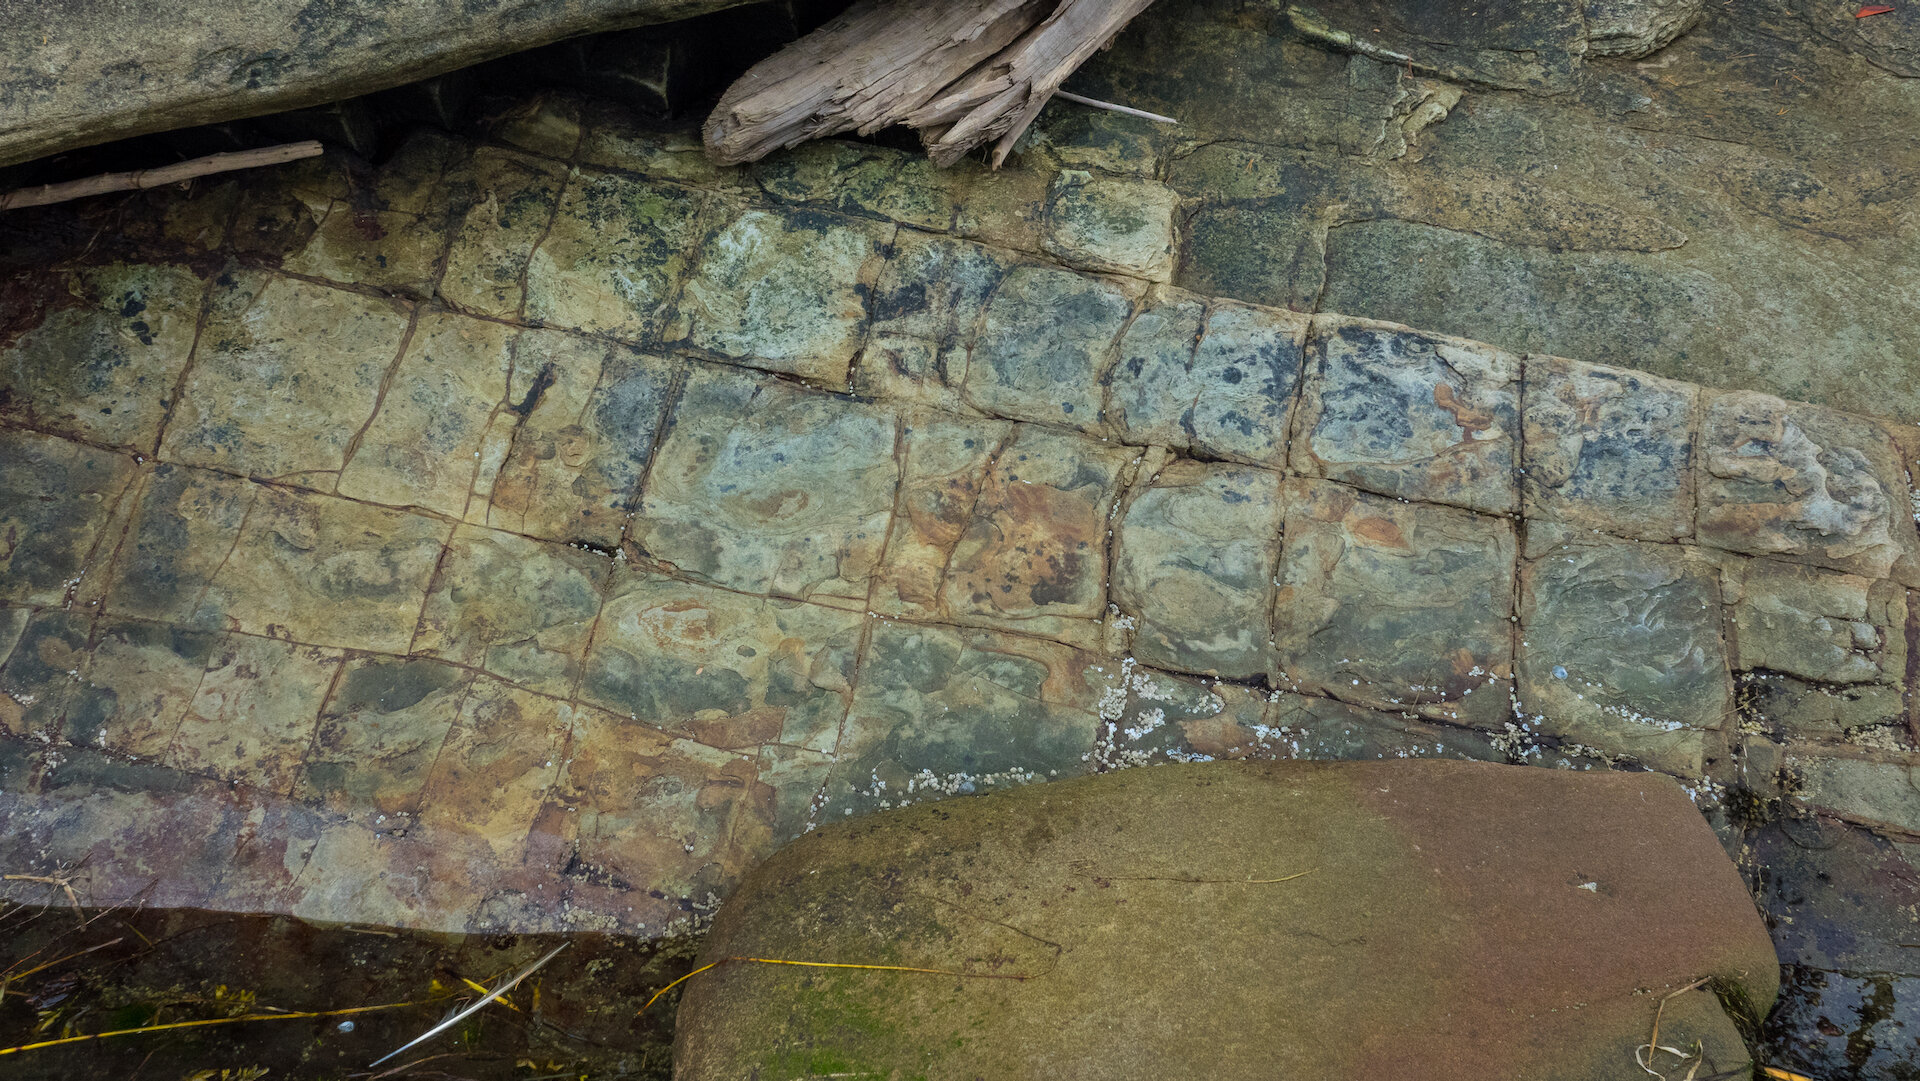  These rocks were a little different! They formed almost a tile pattern and had some interesting colours.  